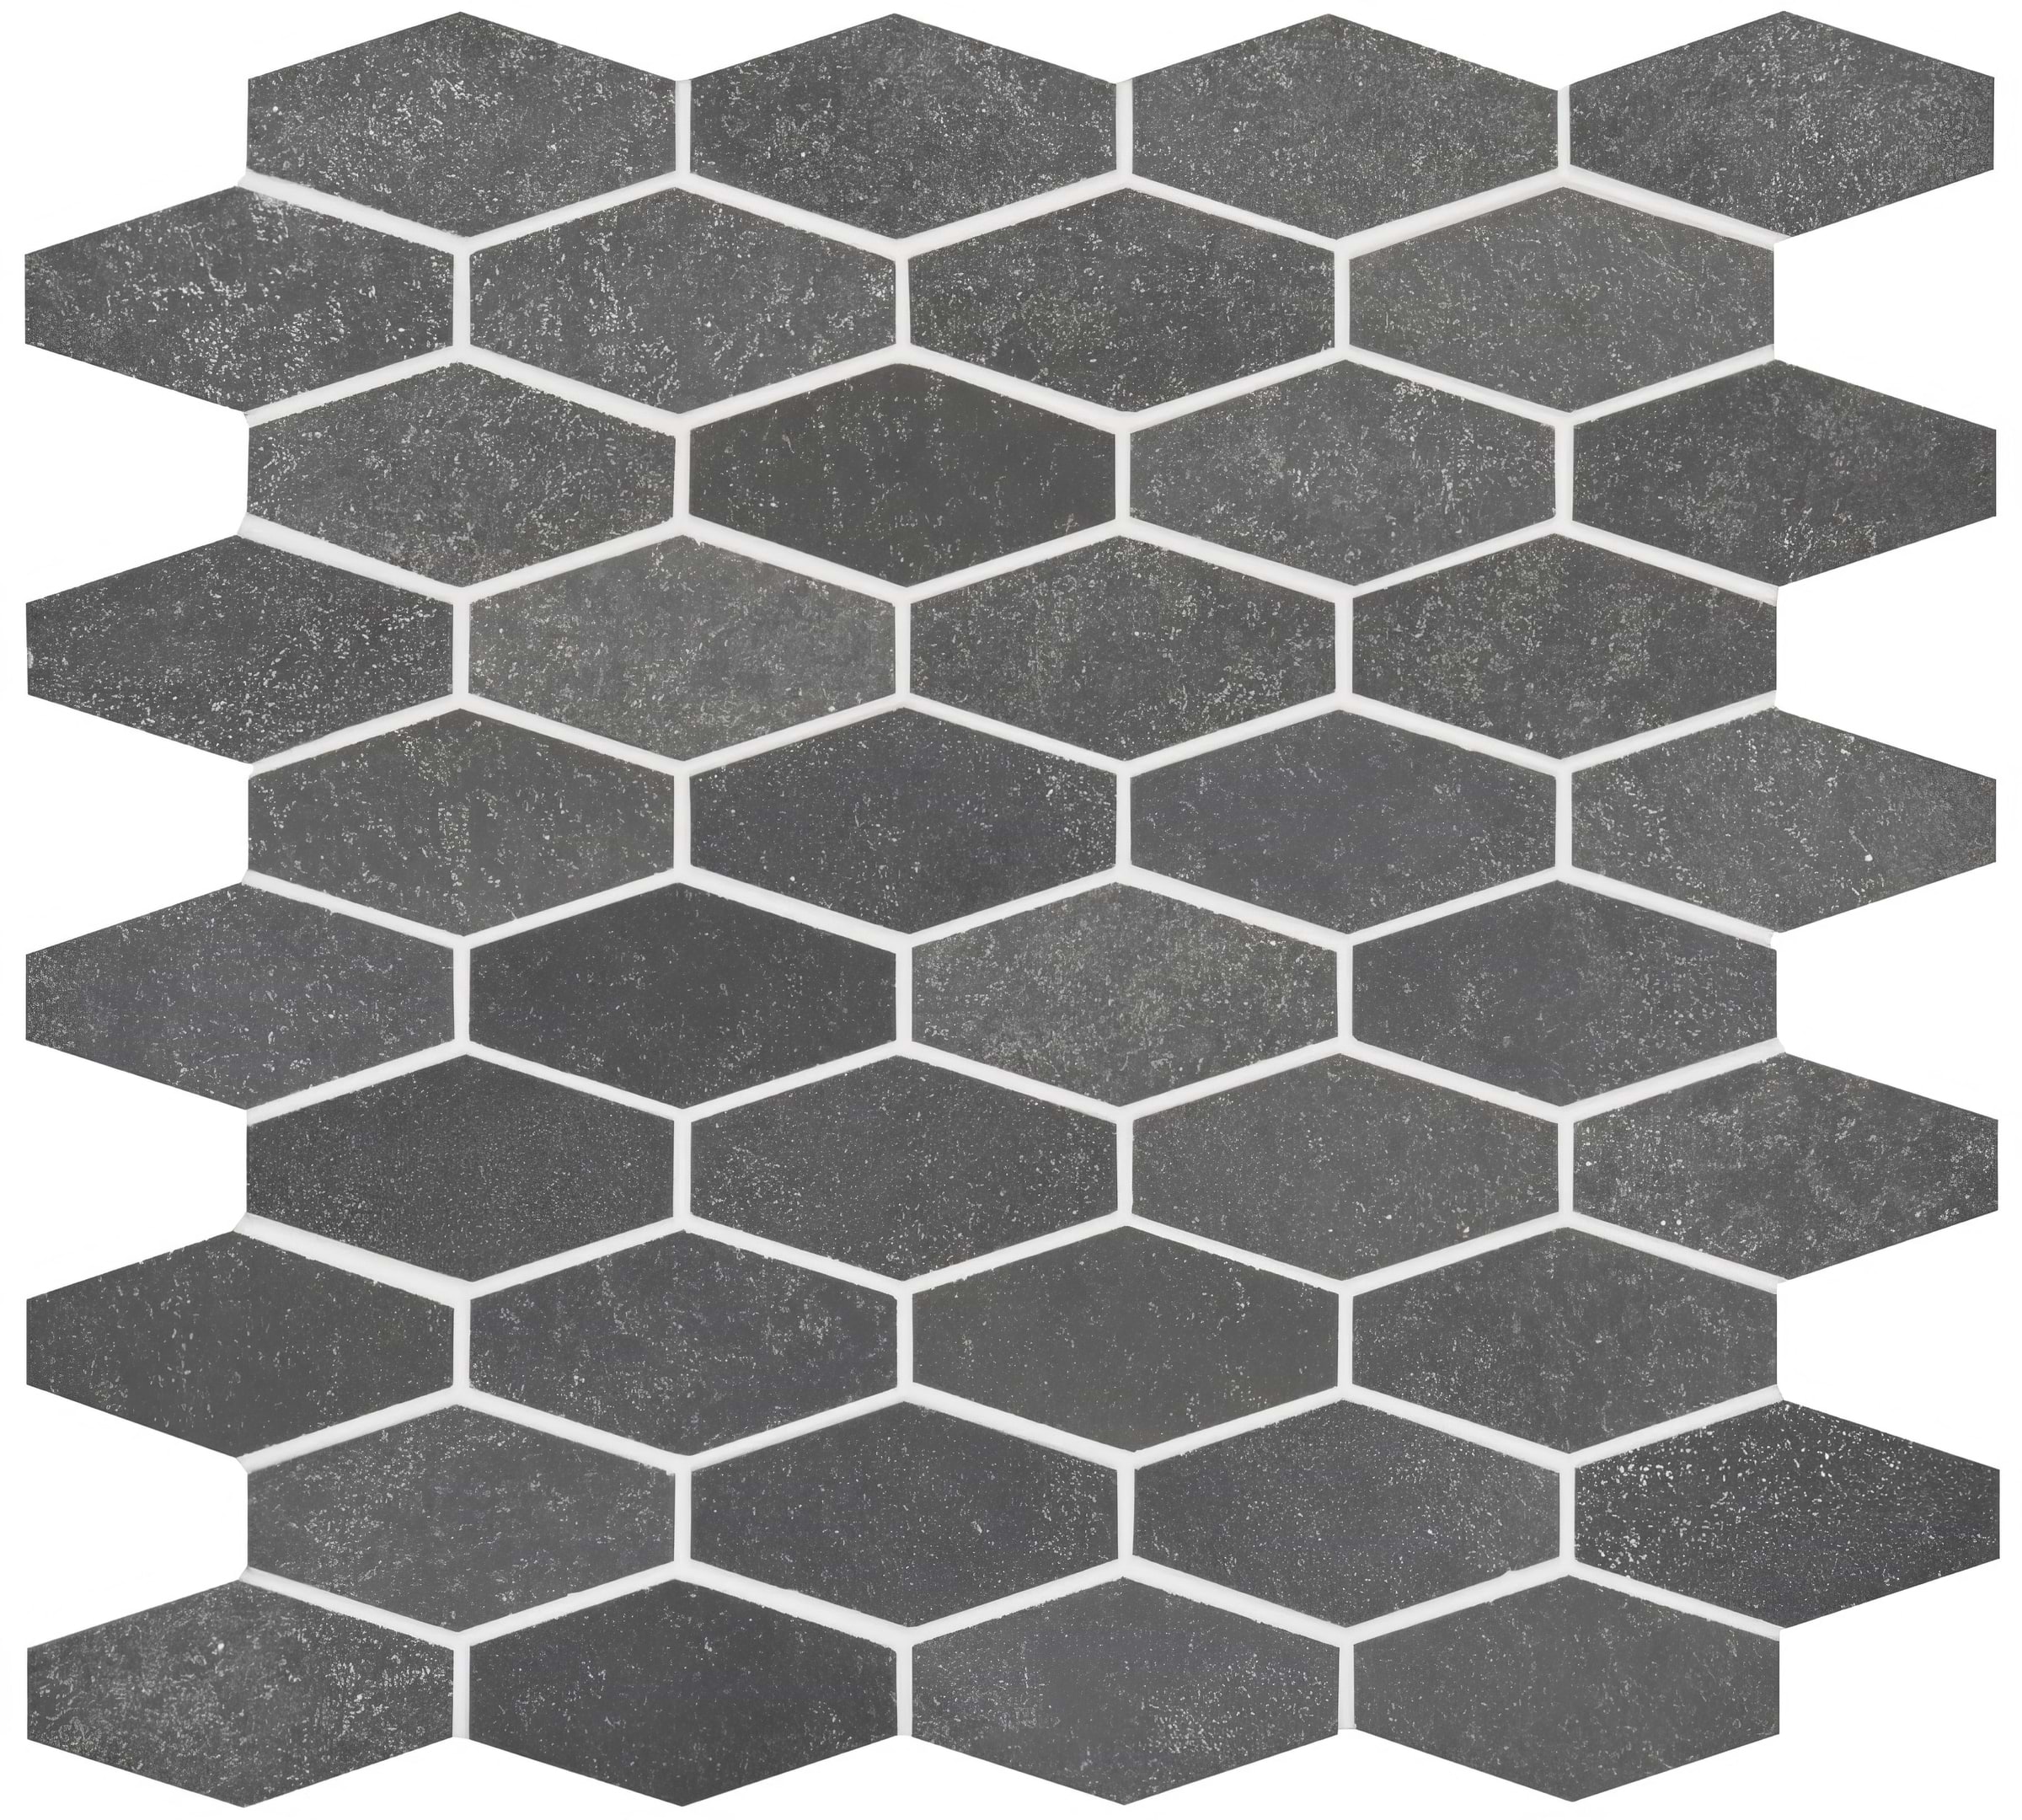 Crypto Large Hexagon Honed Marble Mosaic - Hyperion Tiles